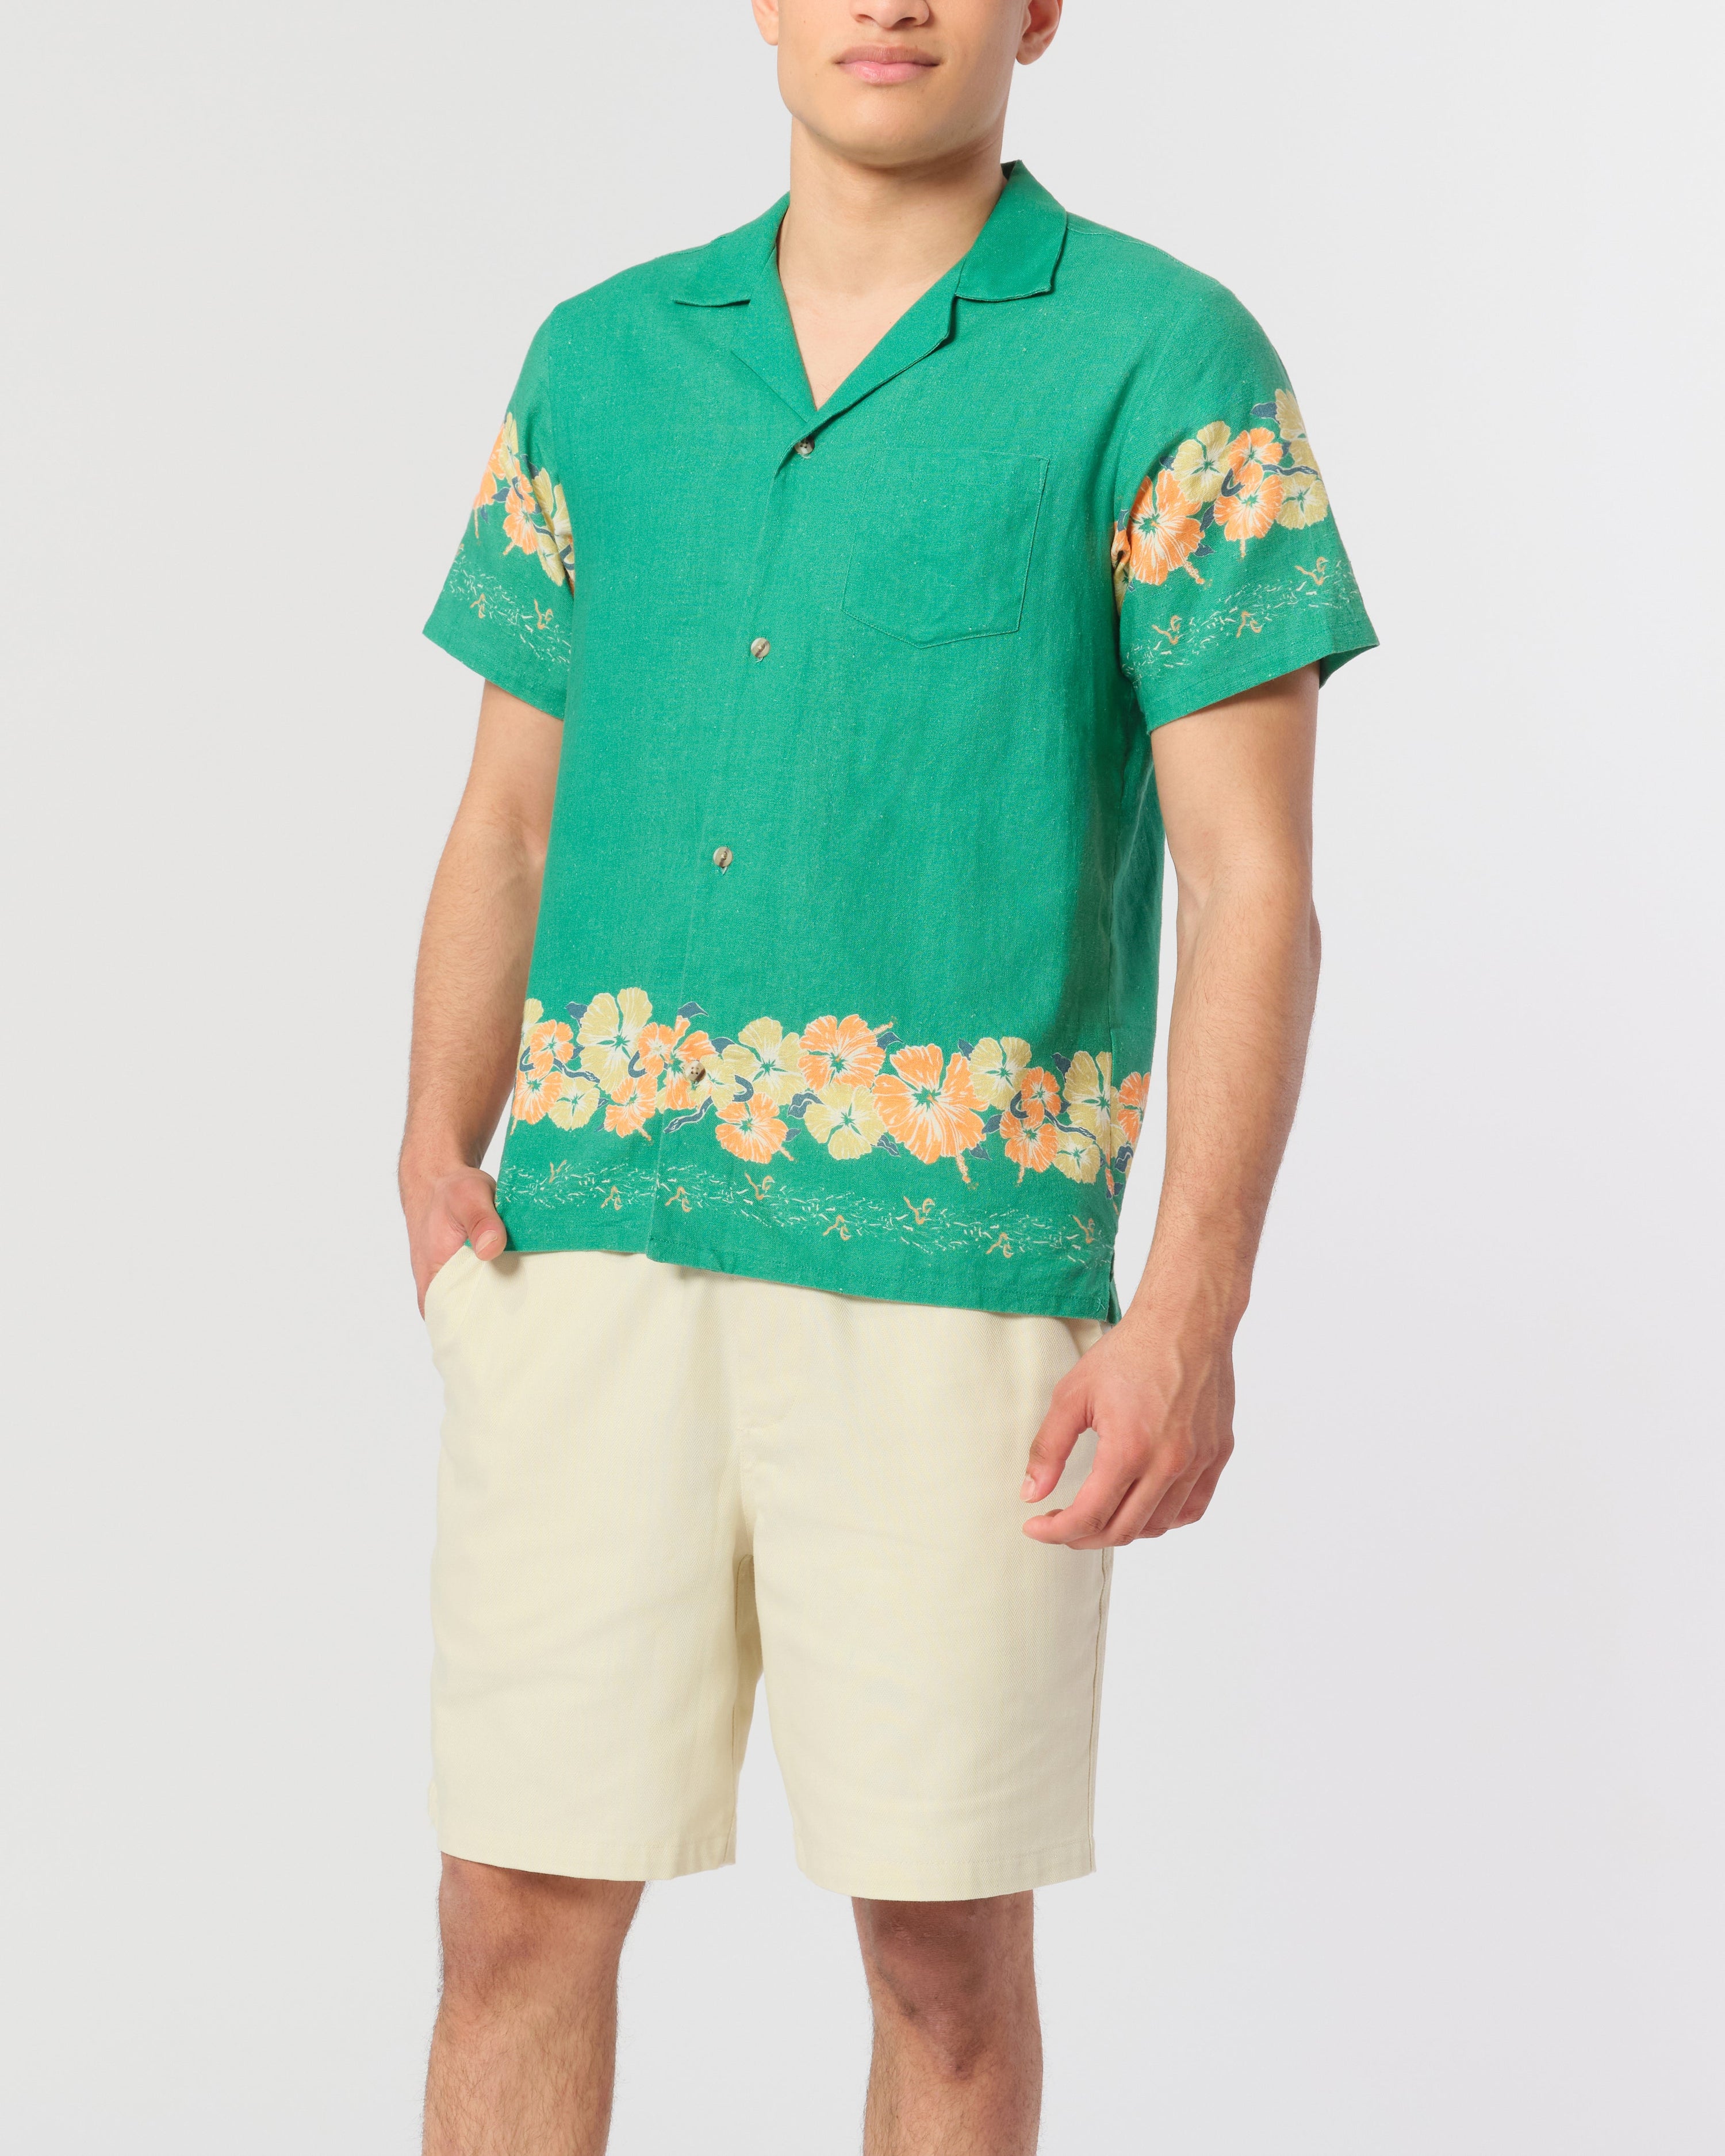 model wearing Green camp shirt with floral motif pattern on the sleeves and bottom hem